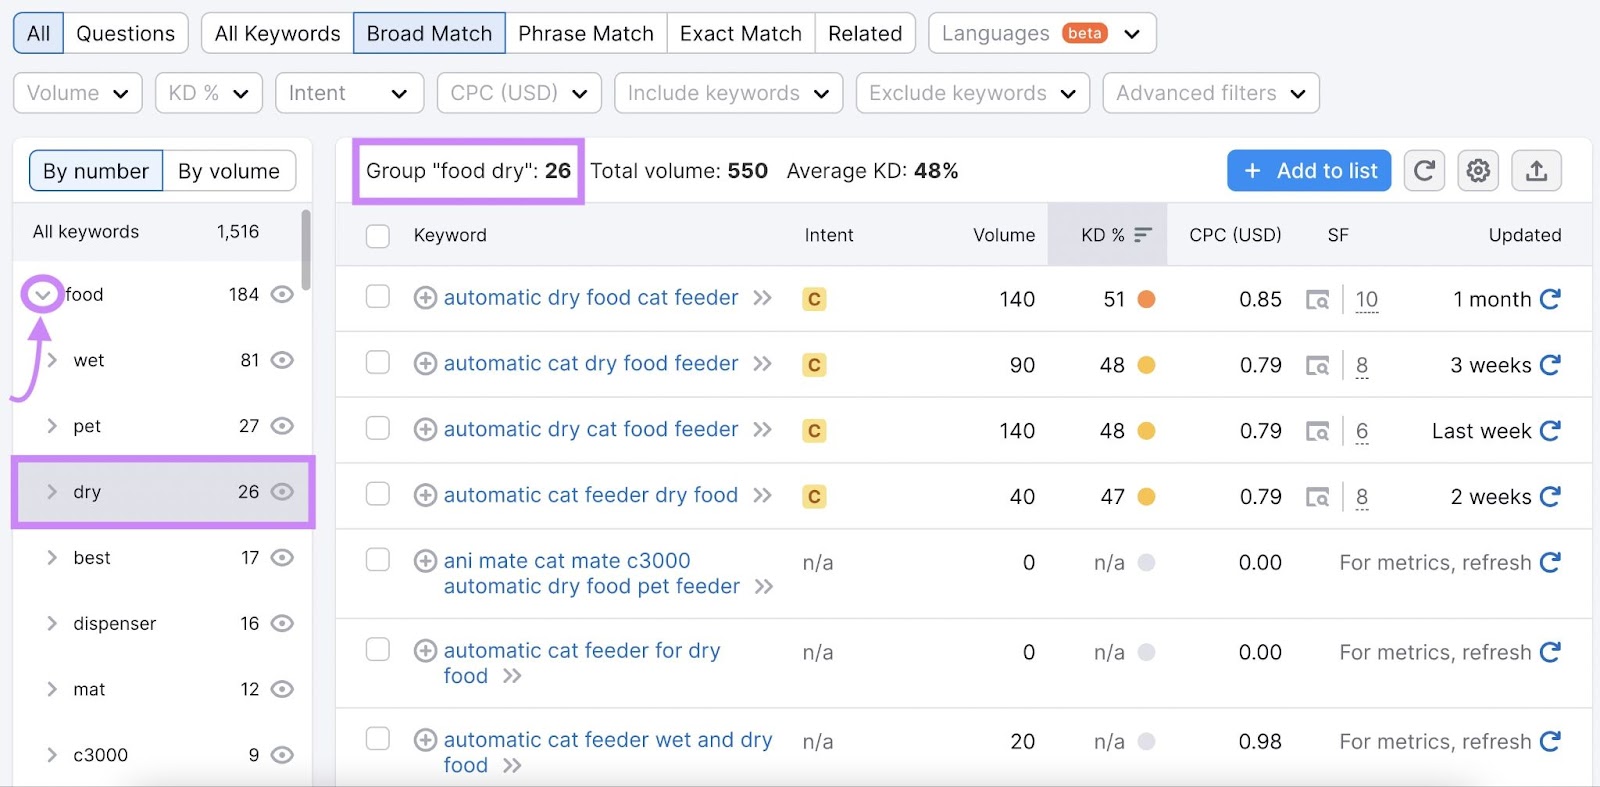 Keyword Magic Tools results filtered by “food” group and “dry” sub-group